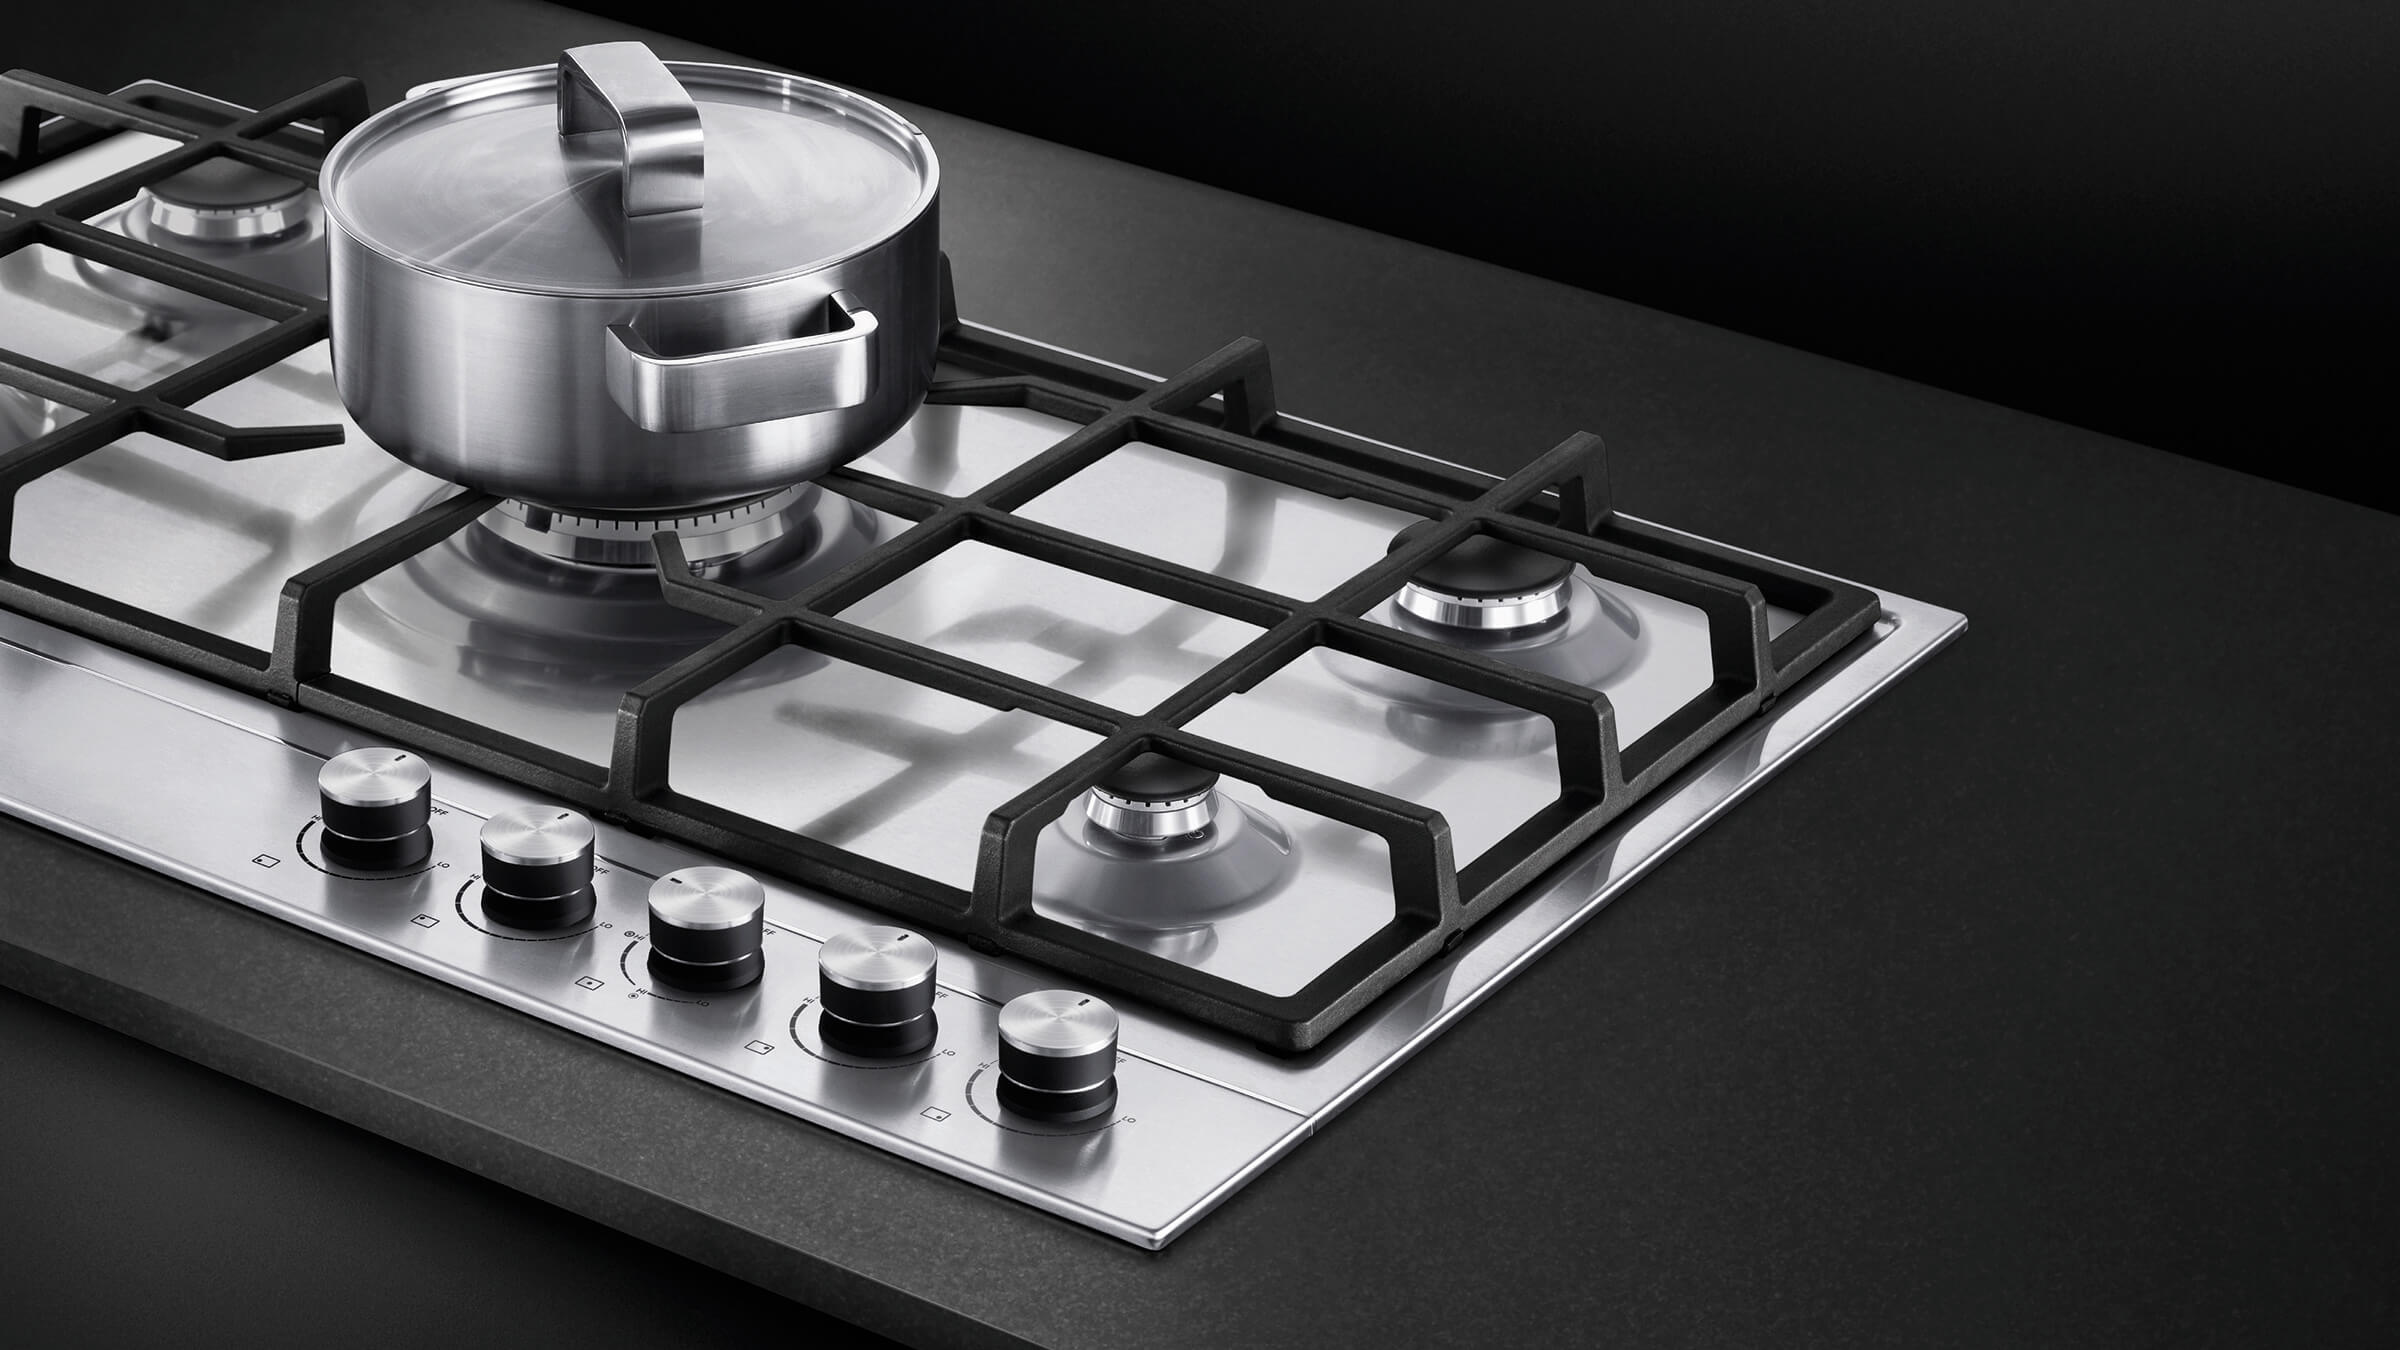 Stylish Simplicity: Integrating Functionality with the Fisher & Paykel CG365DNGX1 Gas Cooktop